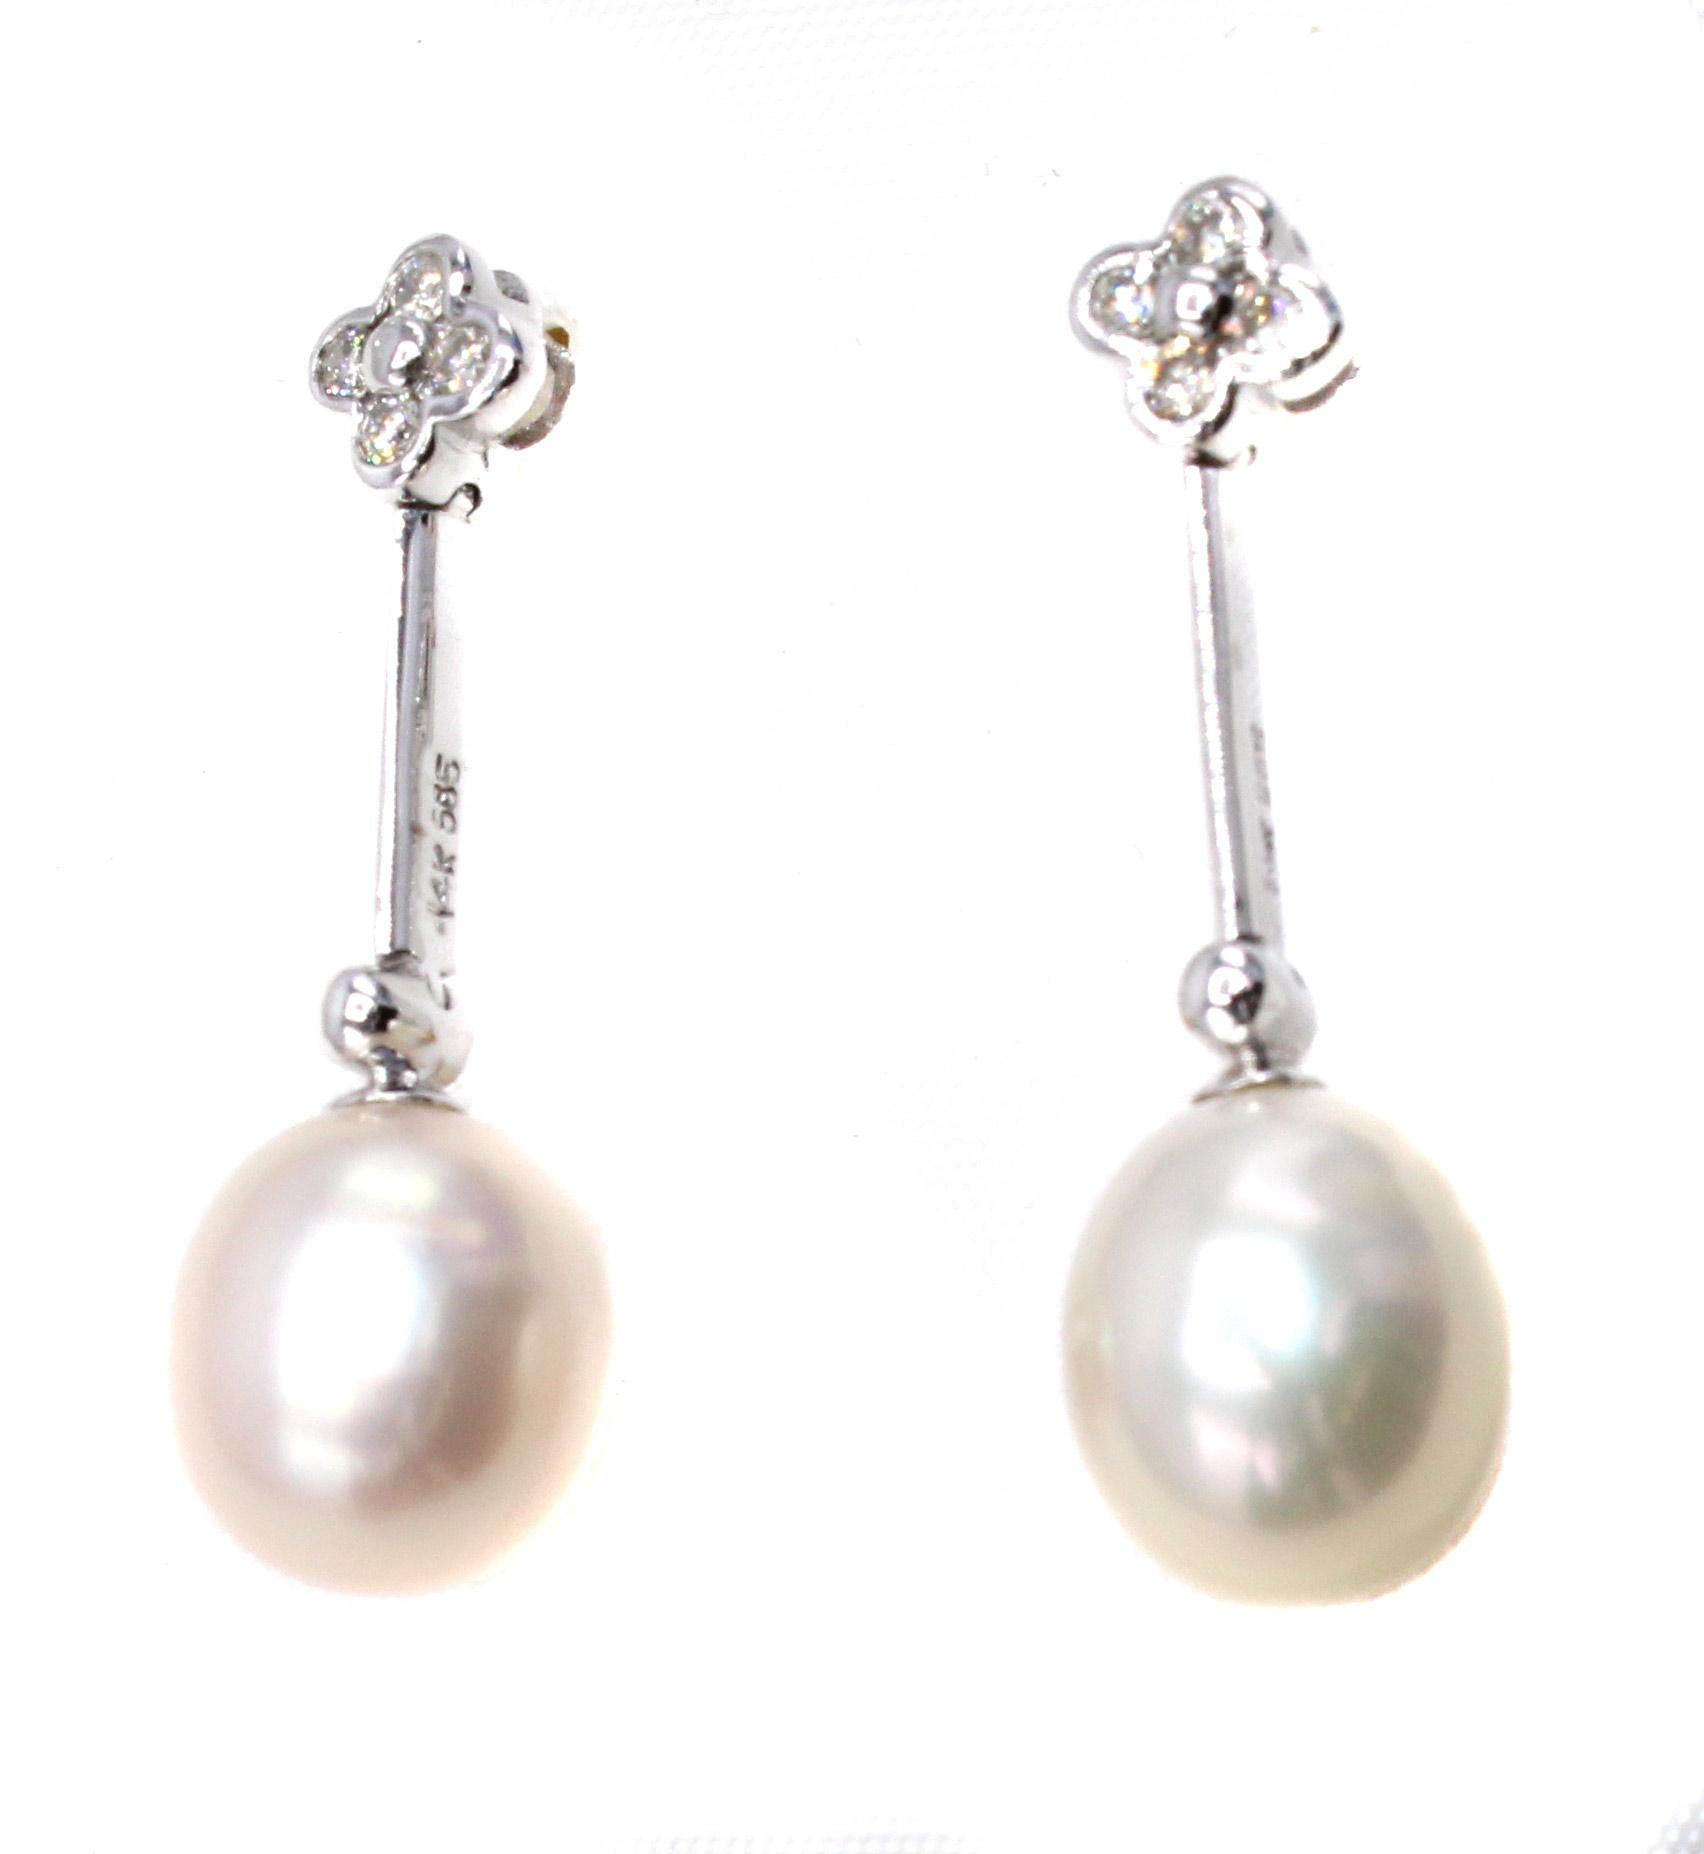 These chic and flexible ear pendants feature 2 perfectly matched  cultured pearls measuring approximately 10.25 millimeters in length and 9 millimeters in width. The pearls have an amazing luster and are white in color with a slight pinkish-cream